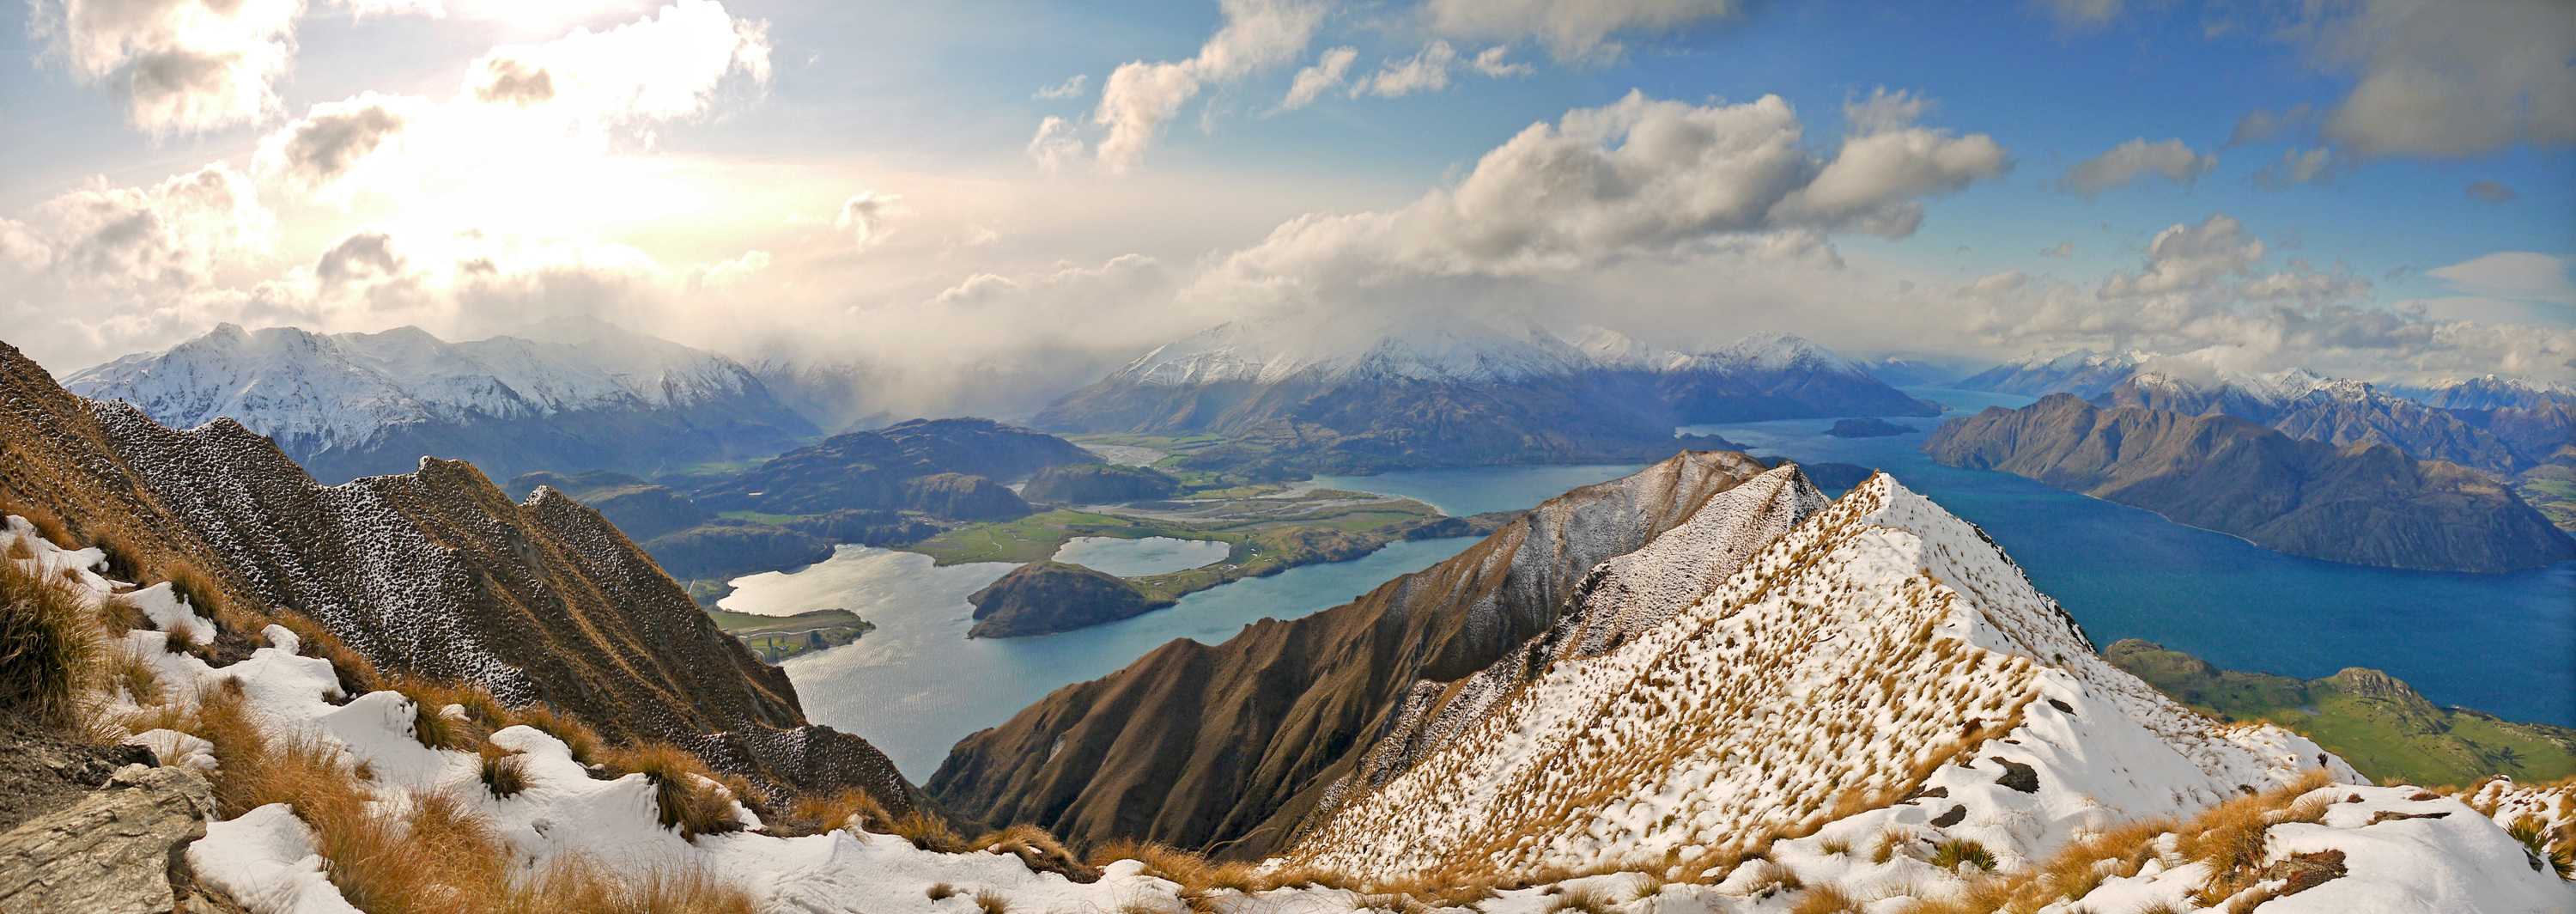 Amazing 14 Days Tour Package For New Zealand From Chennai 